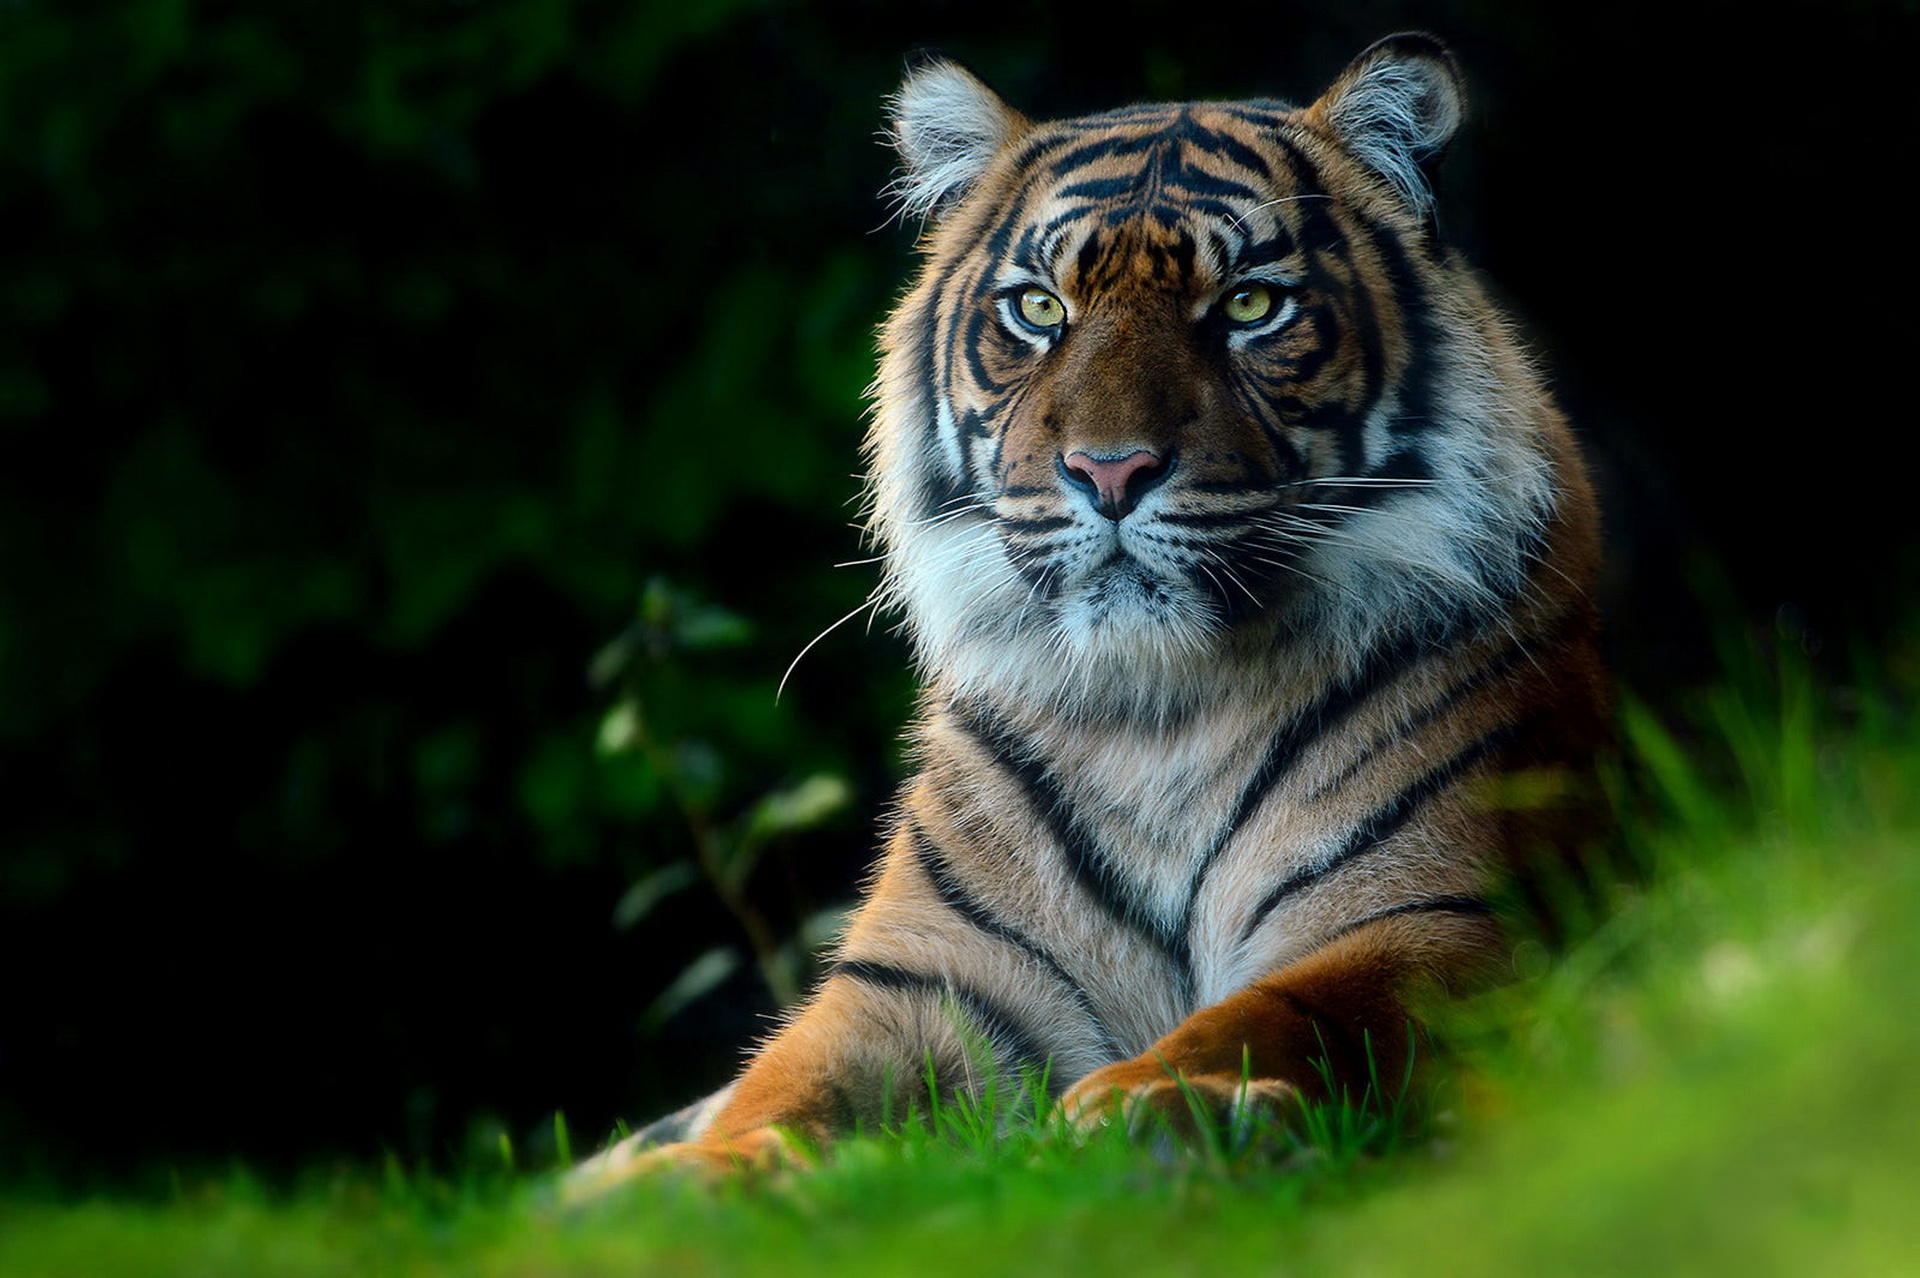 Tiger Pictures - Tiger Wallpapers - National Geographic